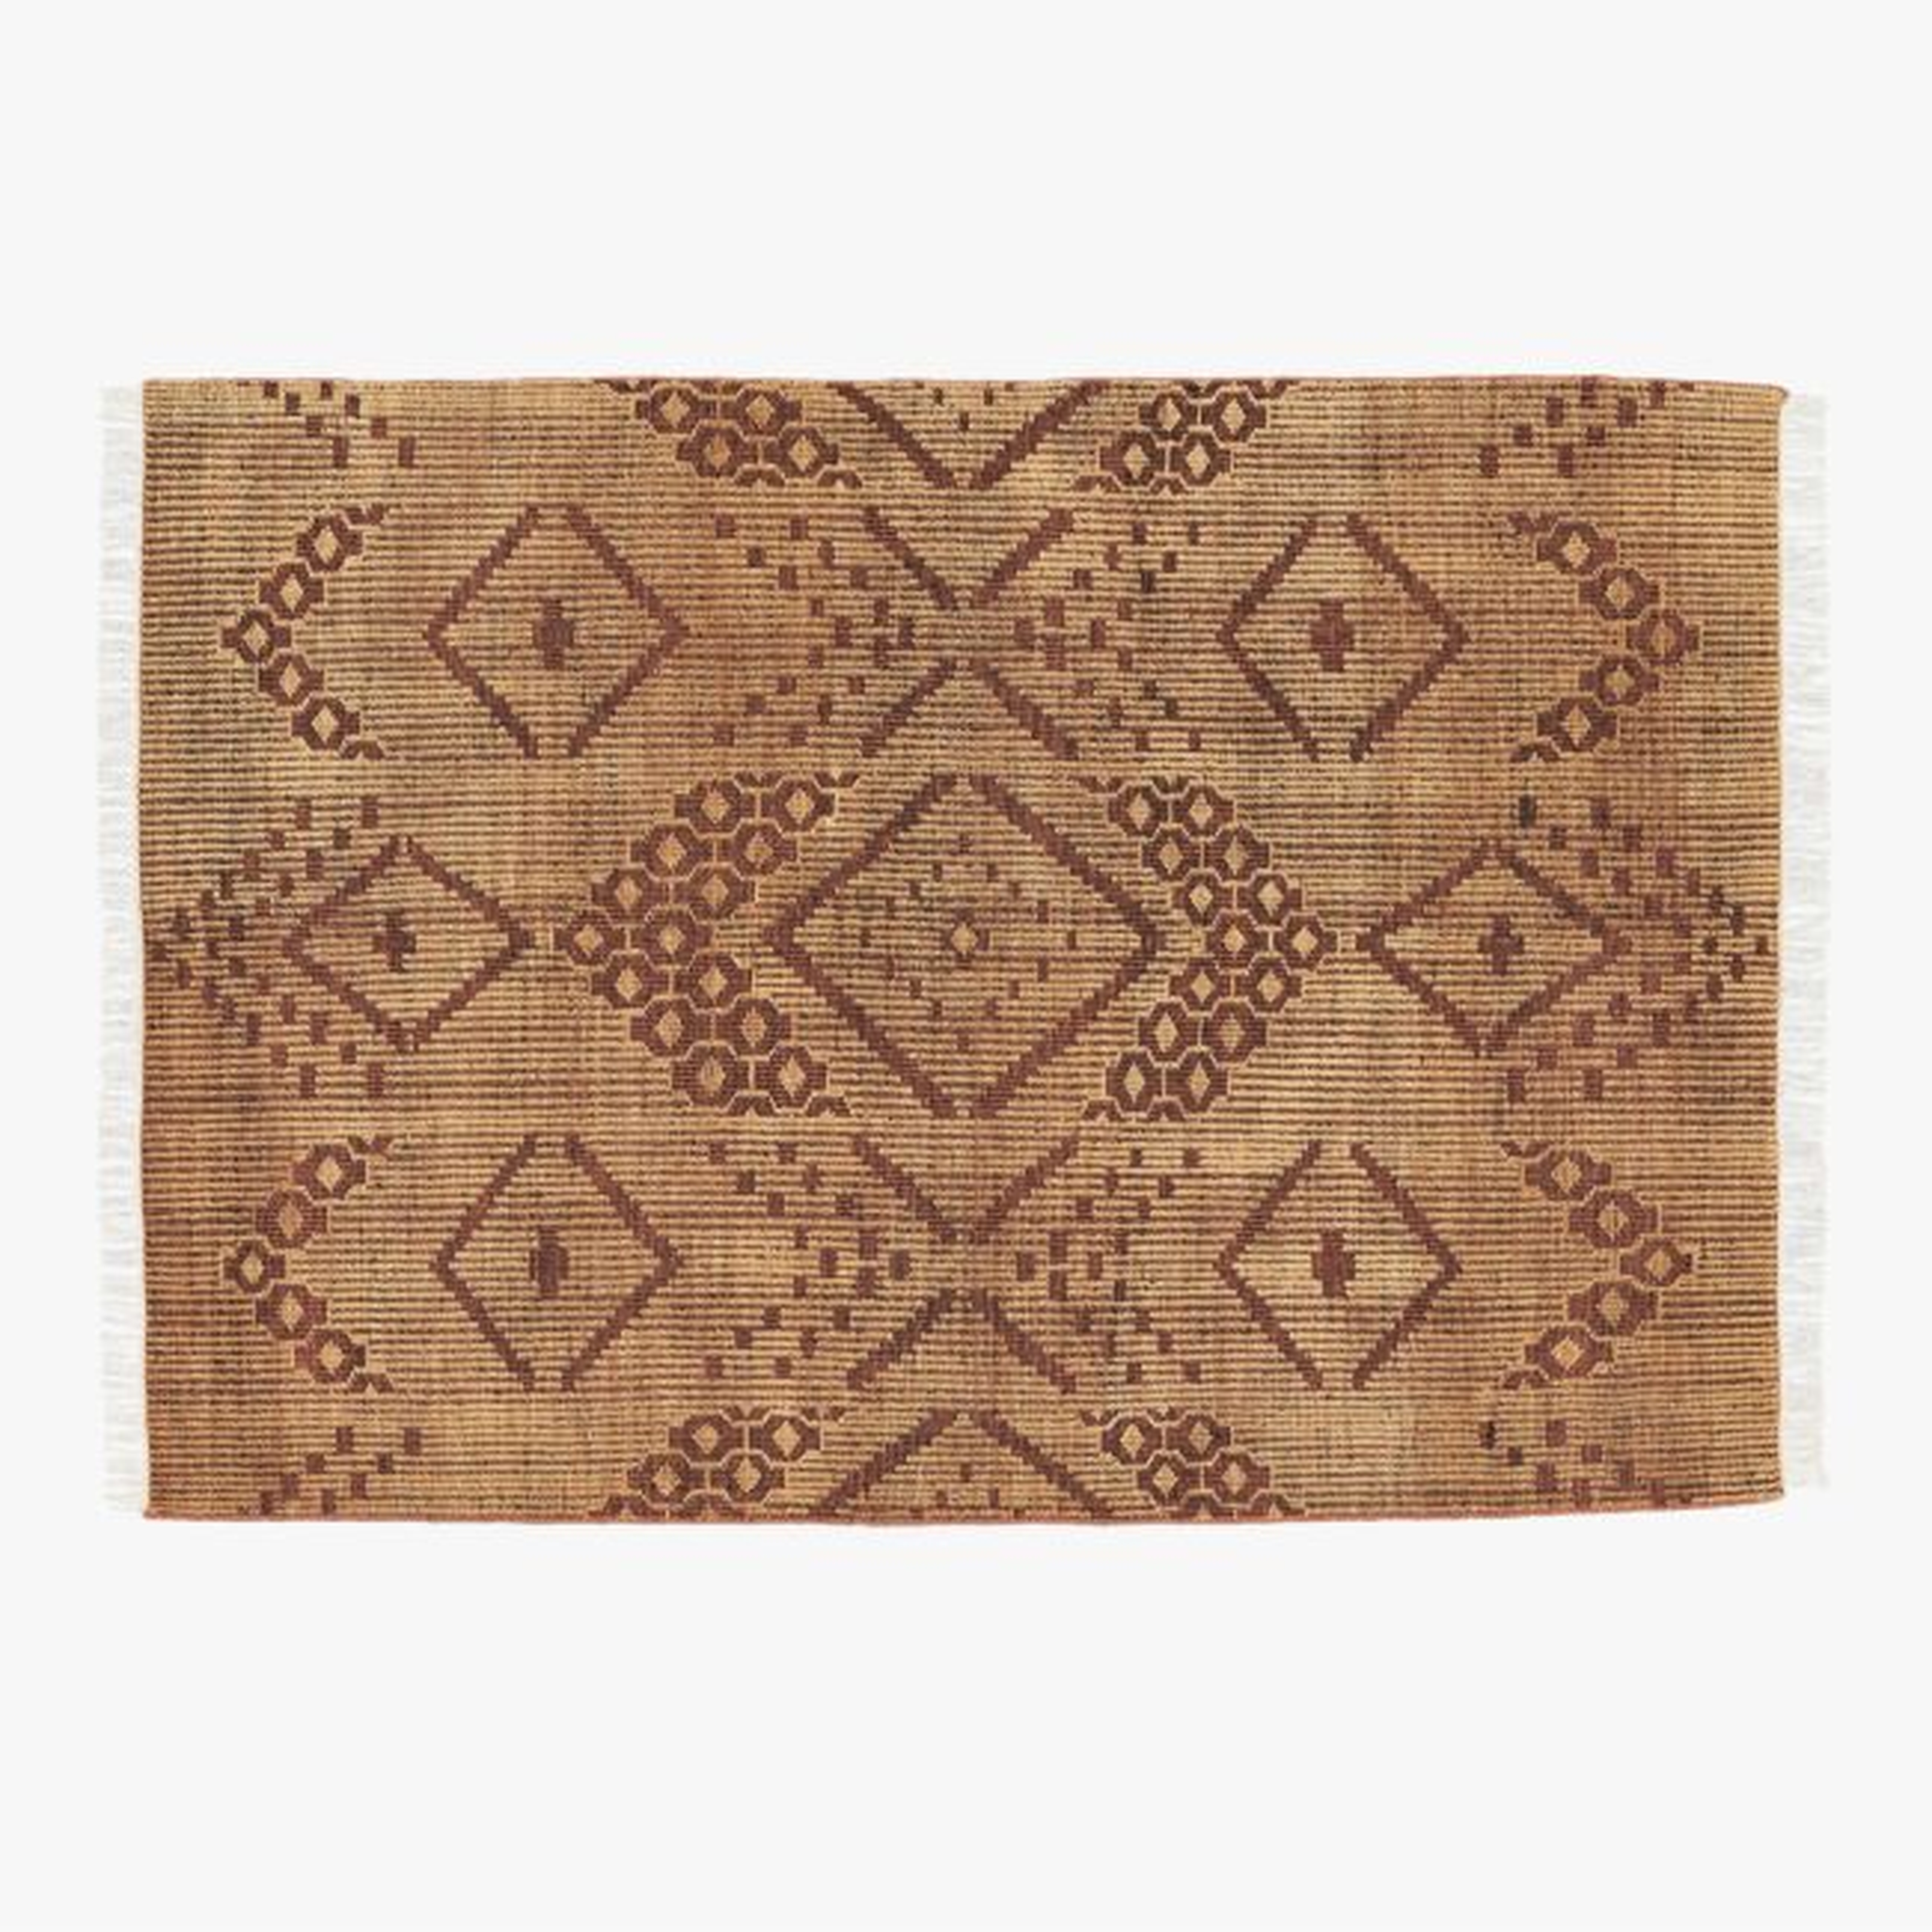 Kit Brown Hand-knotted Rug 6'x9' - CB2